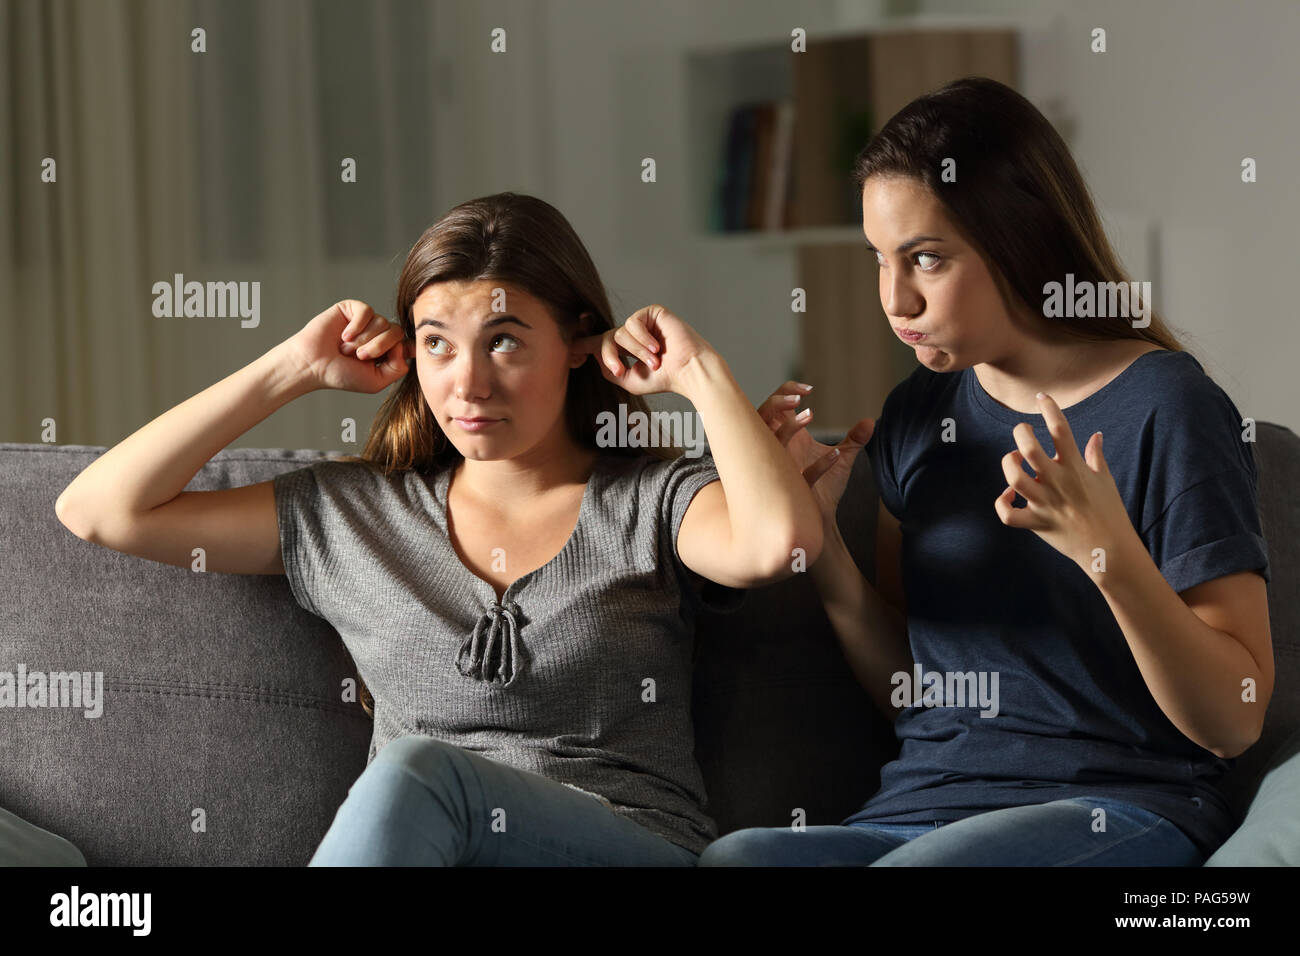 Furious woman and friend ignoring her sitting on a couch in the living room at home Stock Photo